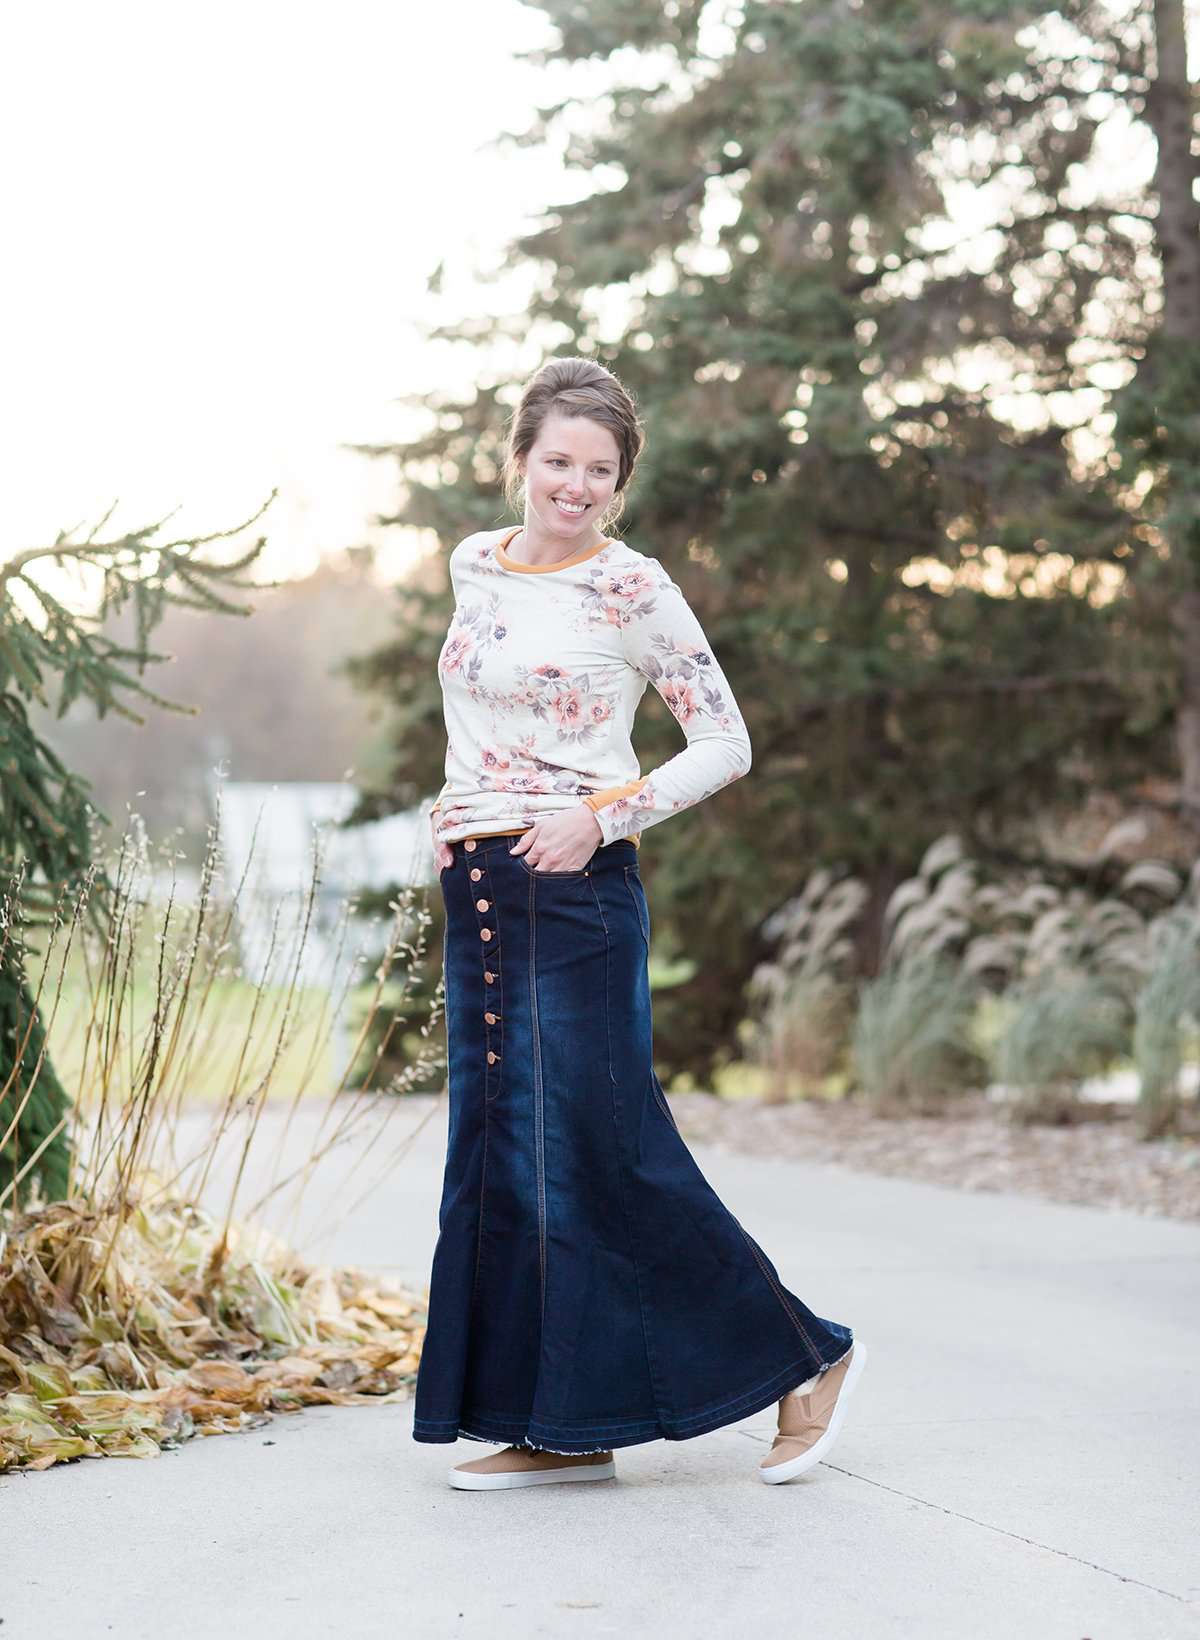 Woman wearing a long denim skirt without a slit that has buttons up the front and is a flare, a-line style.